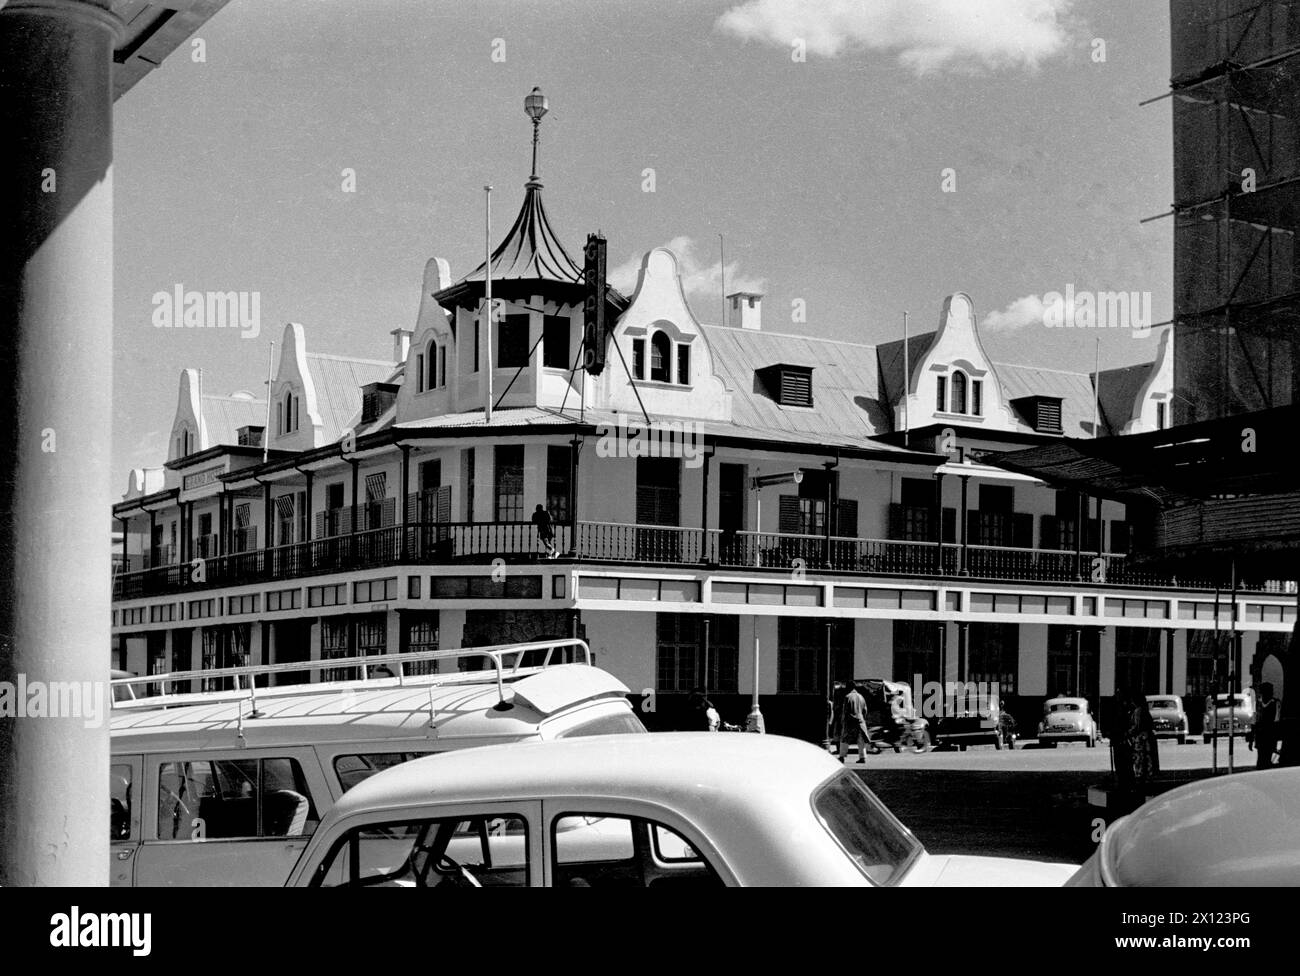 Grande Hotel on First Street Salisbury Rhodesia, now Harare Zimbabwe. The Colonial Era Building was Designed by James Cope-Christie and Thomas Sladden in 1914. Vintage or Historic Monochrome or Black and White Image c1960 Stock Photo